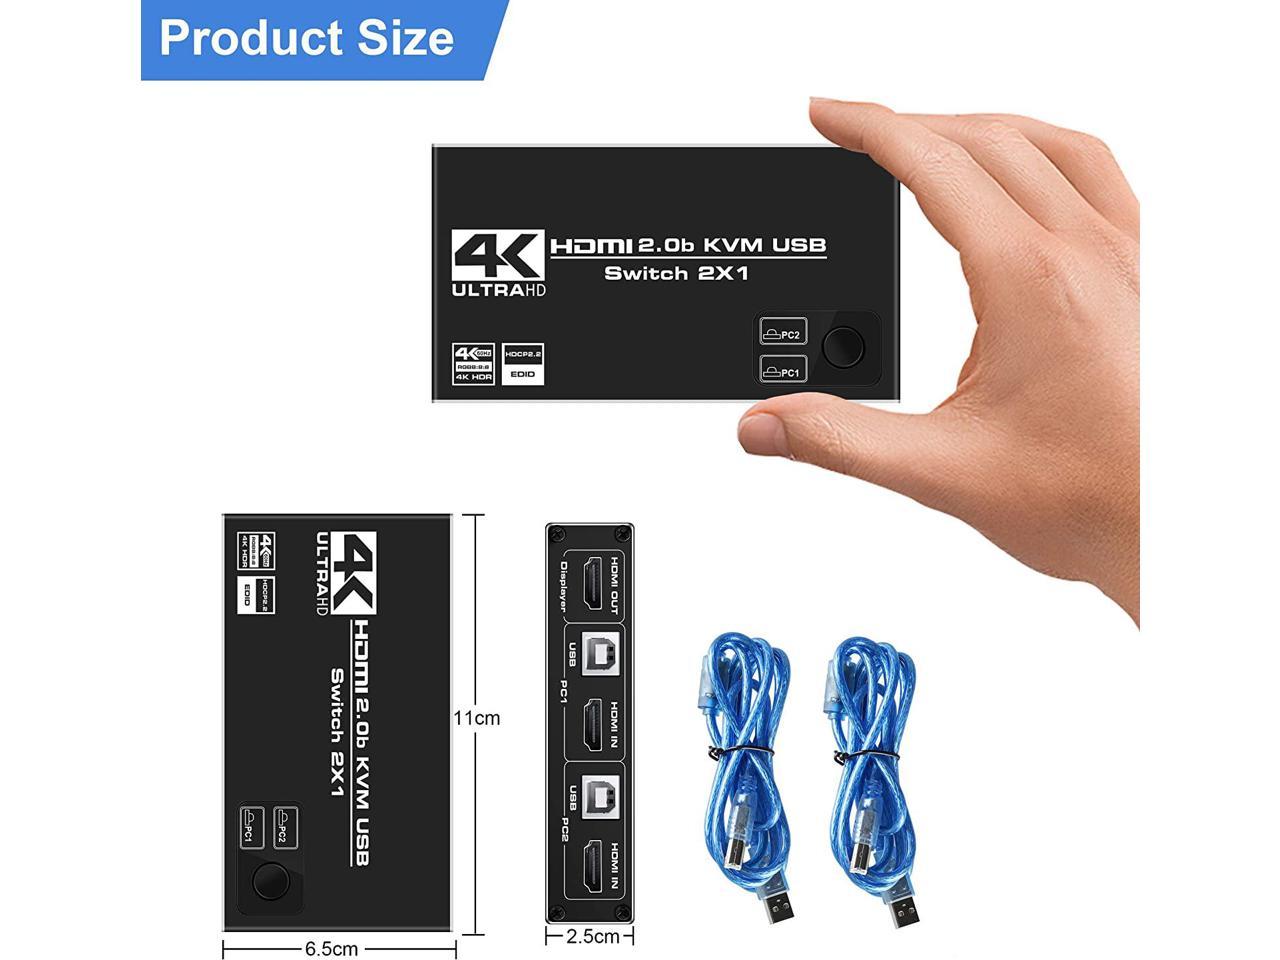 HF-HKU212: HDMI KVM Switch, 4K@60Hz USB Switch 2x1 HDMI2.0 Ports + 3X USB KVM Ports, Share 2 Computers to one Monitor, Support Wireless Keyboard and Mouse, USB Disk, Printer, USB Camera (Included 2 USB Cable) - Click Image to Close